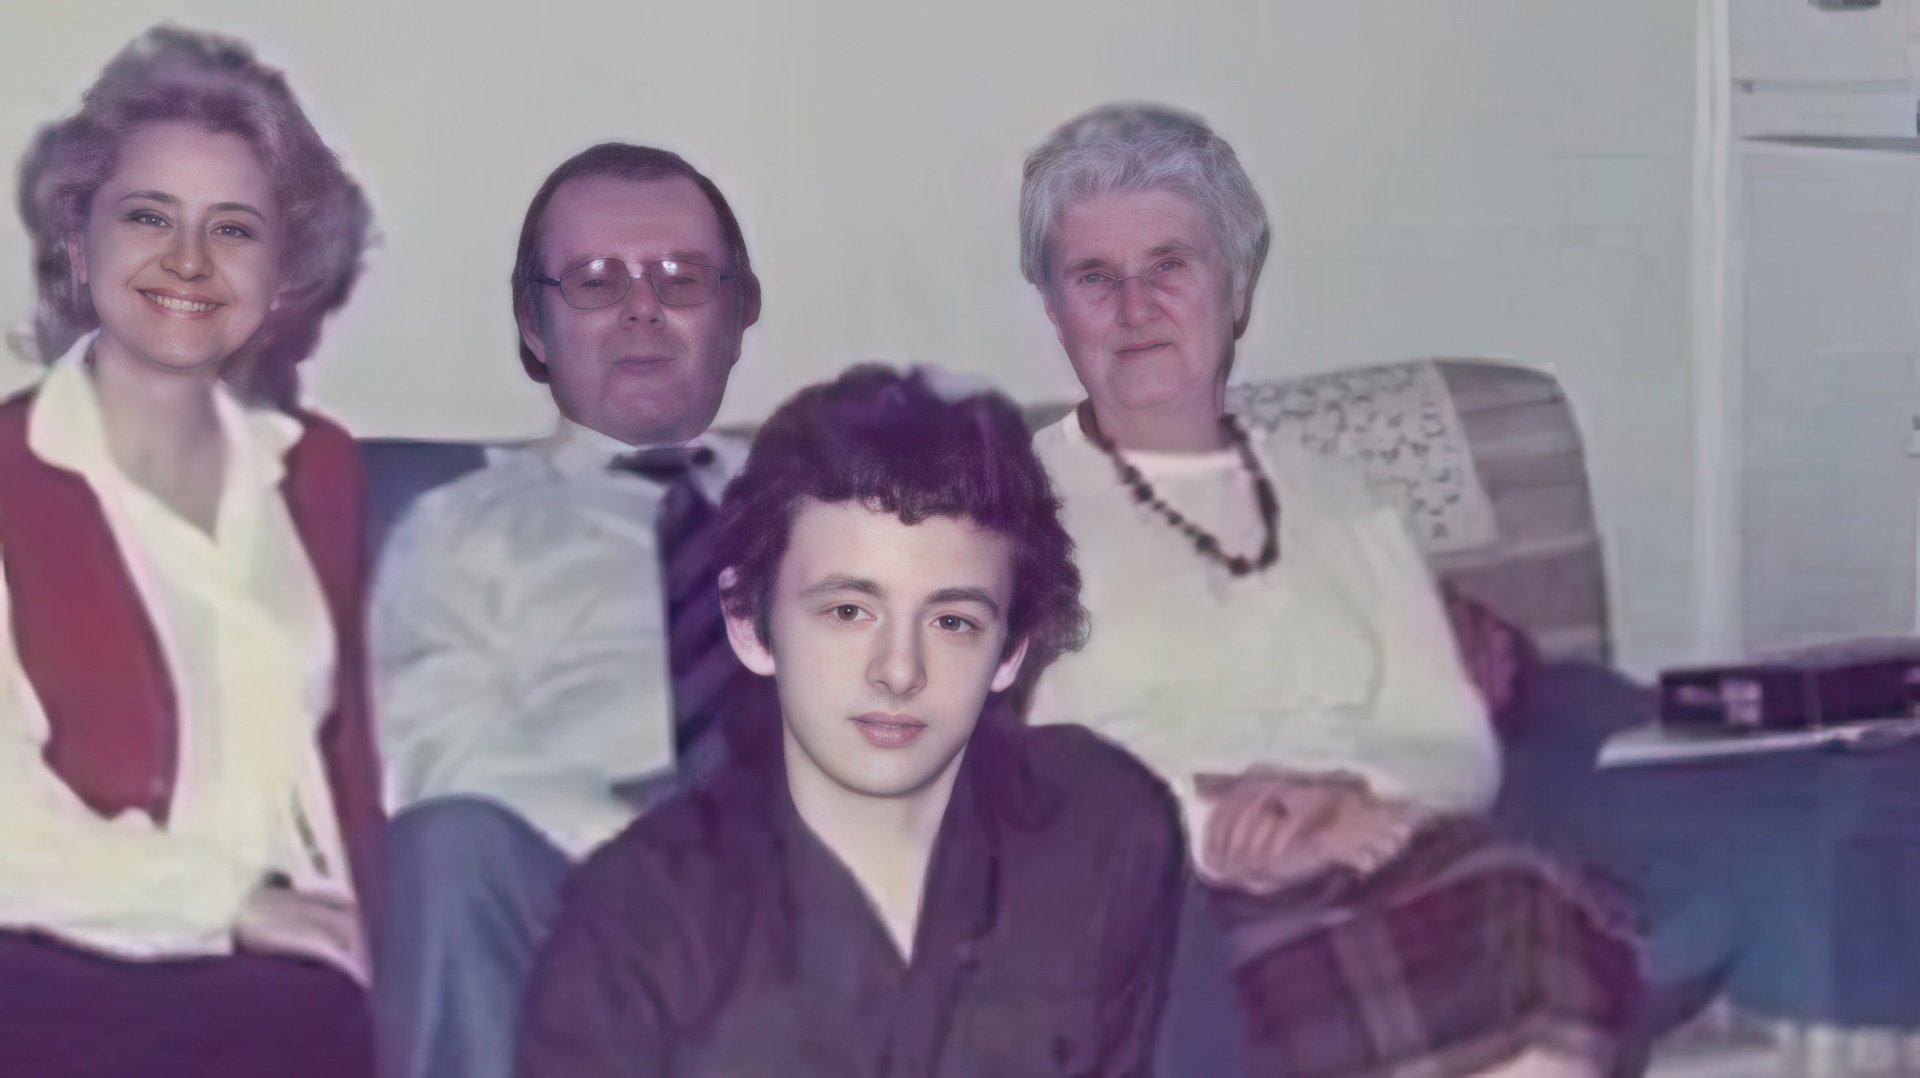 Michael Sheen with his family